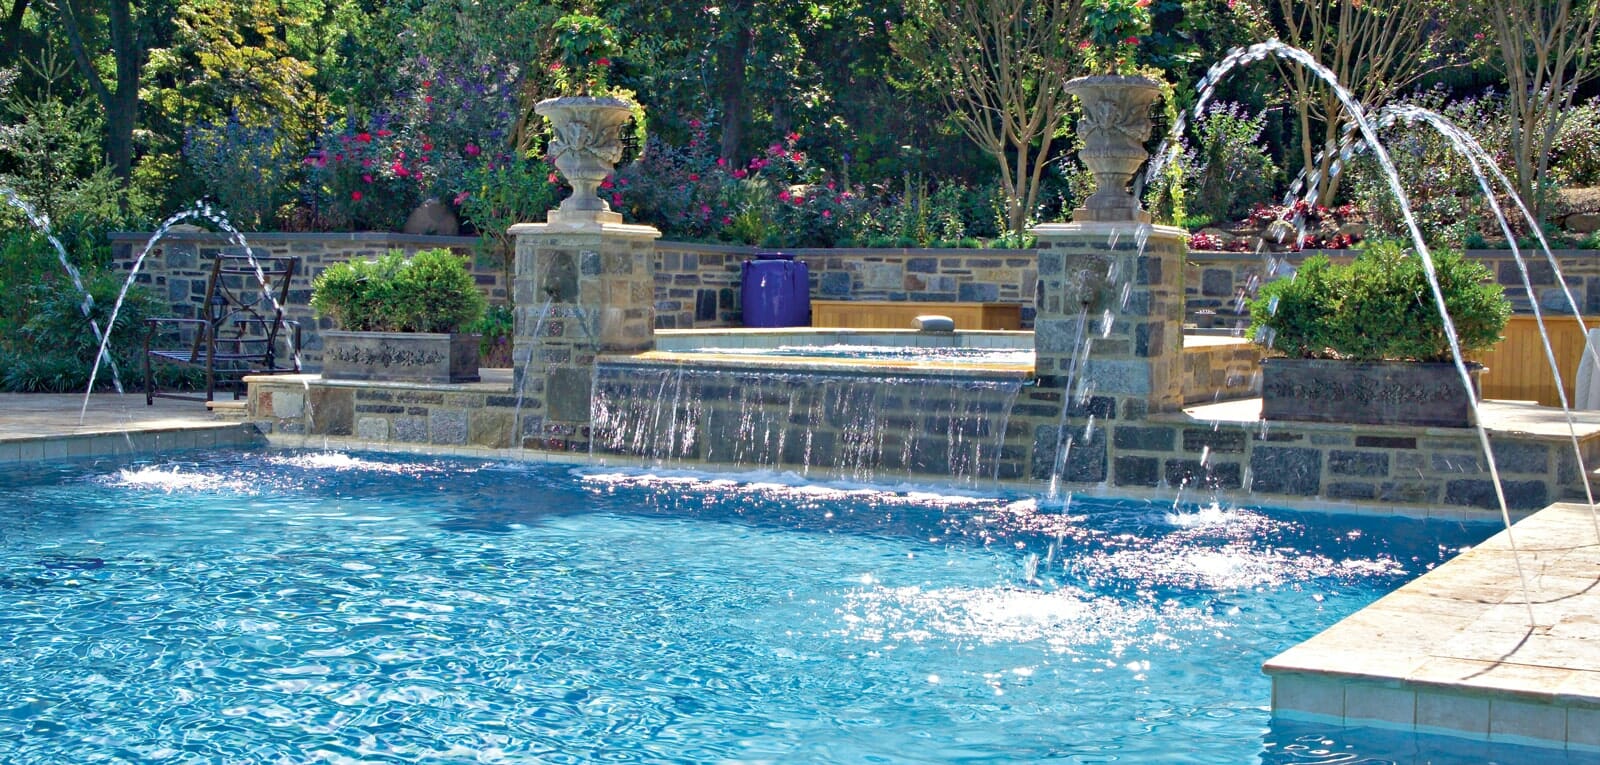 Pool Deck Jets Water Features